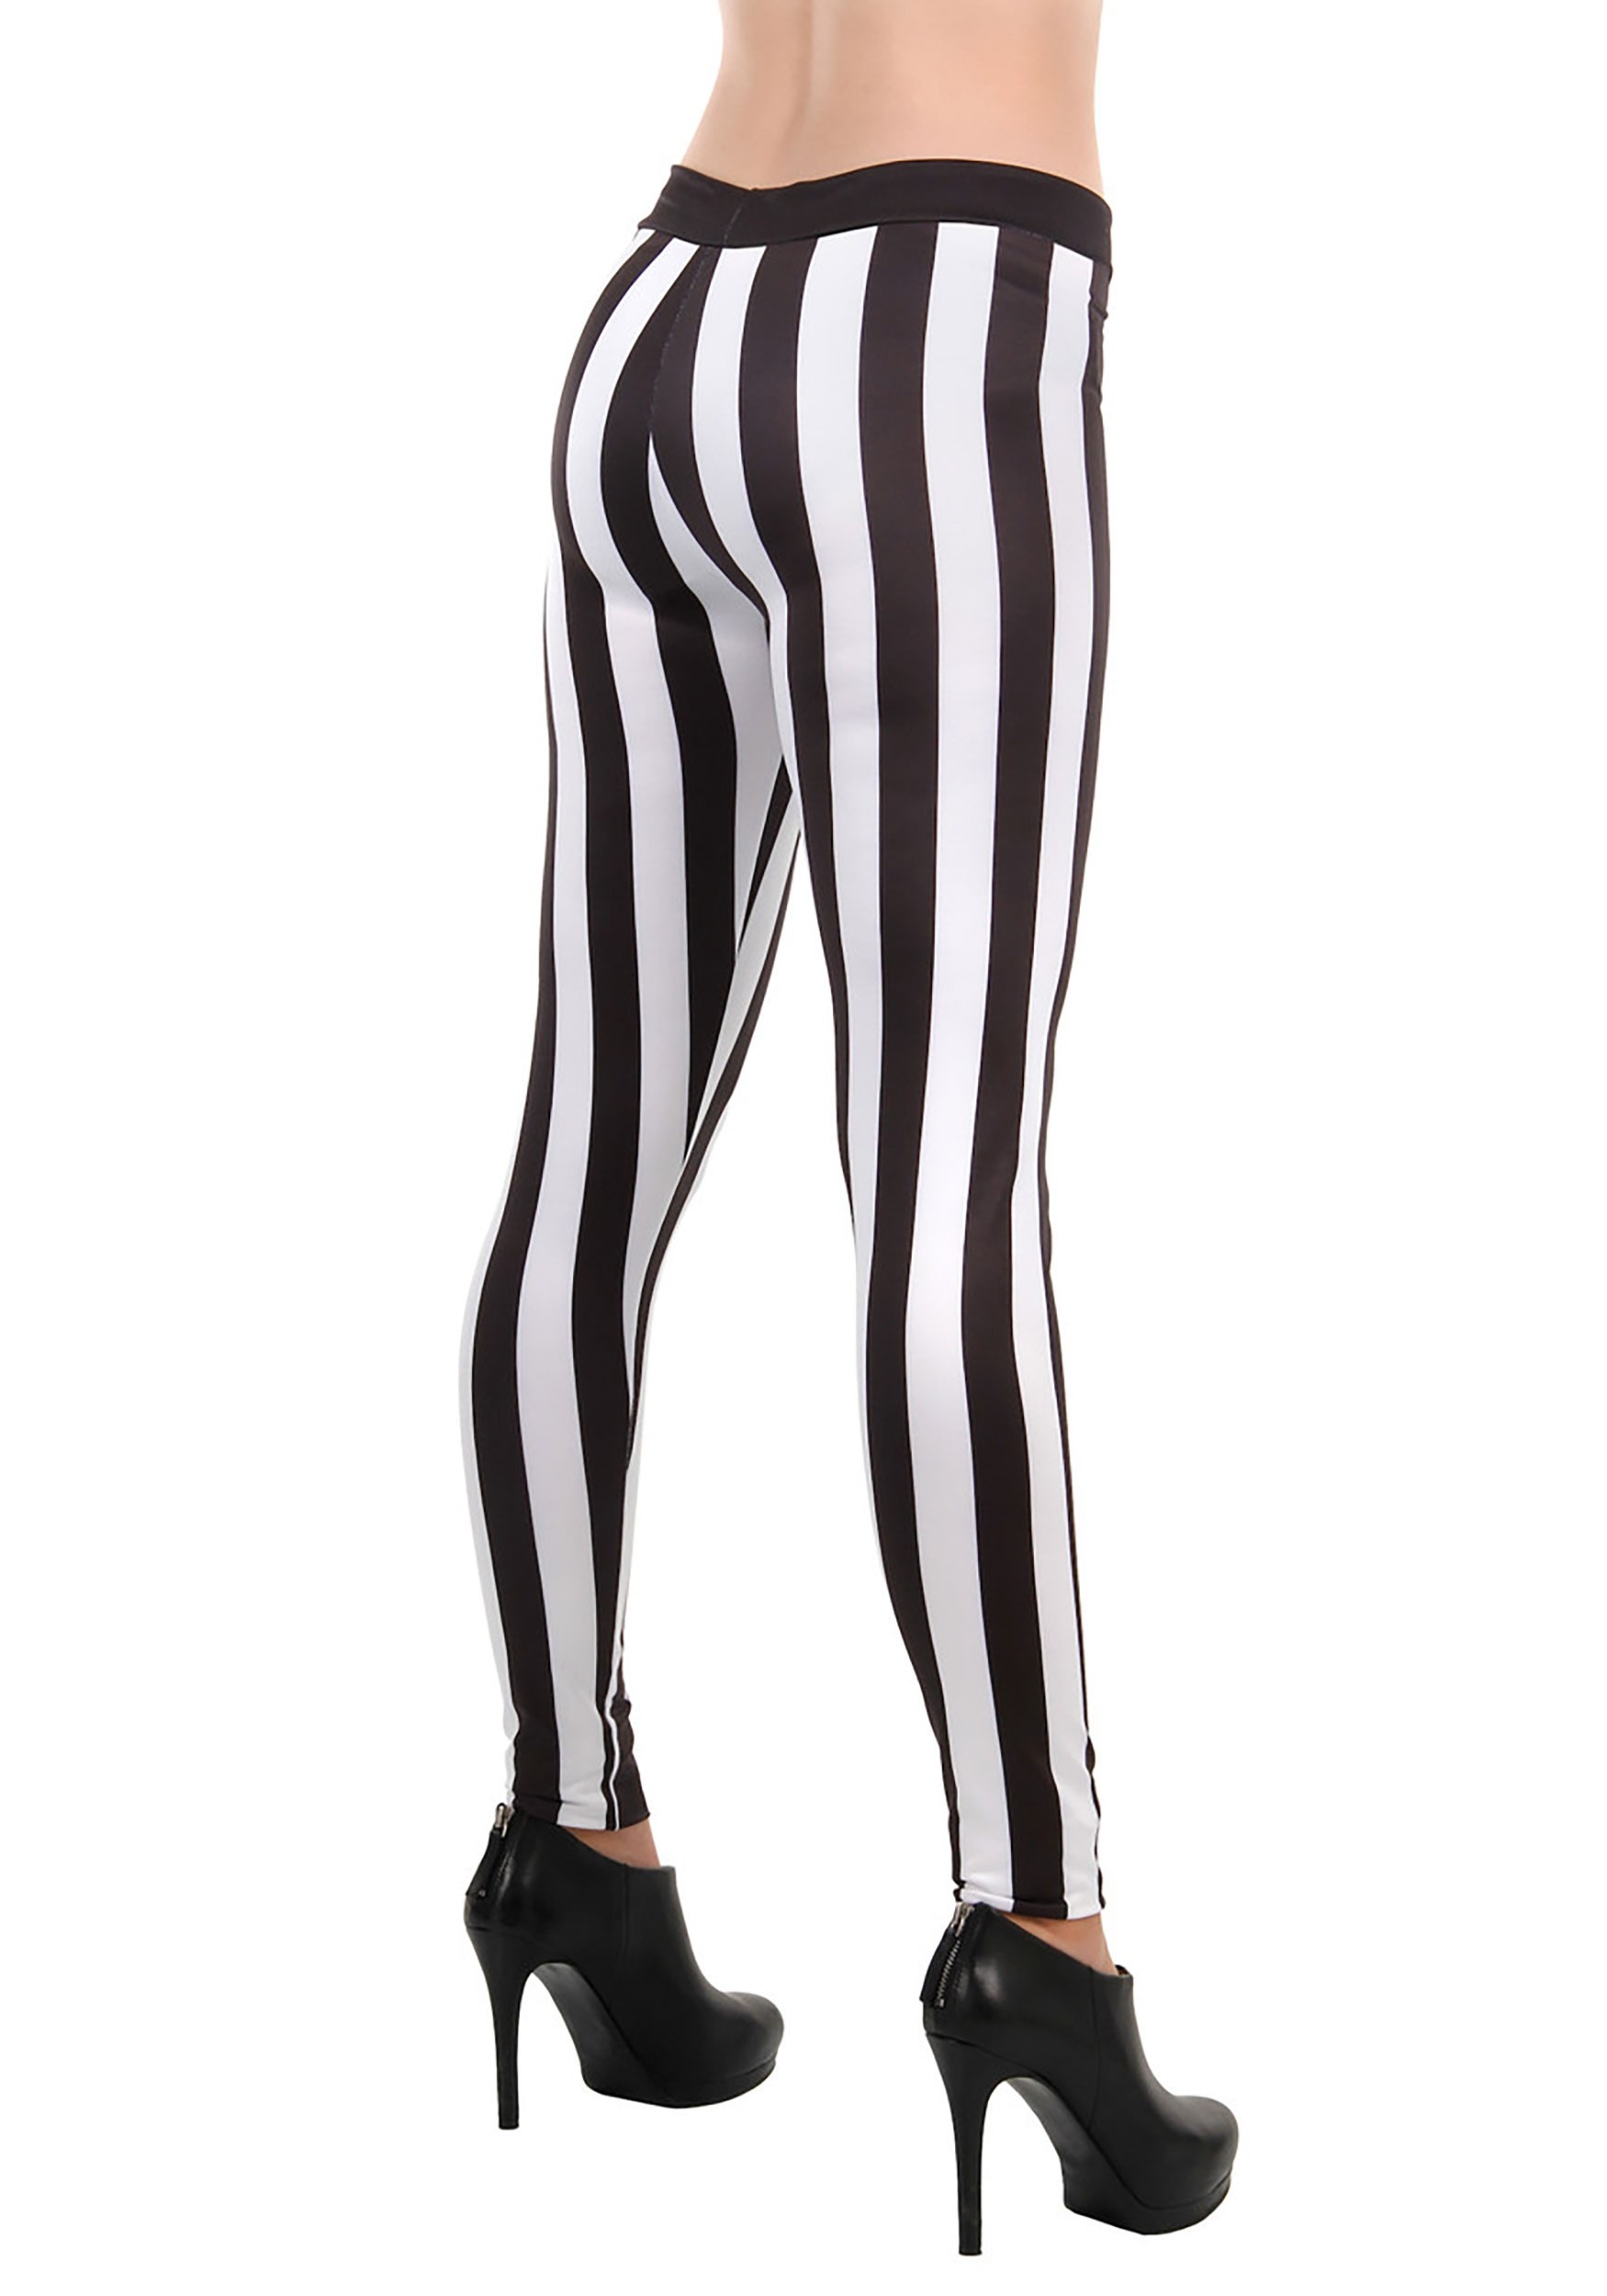 STARCOVE Black White Striped Leggings Women, Halloween Witch Goth Printed  Yoga Pants Cute Graphic Workout Designer Tights at  Women's Clothing  store